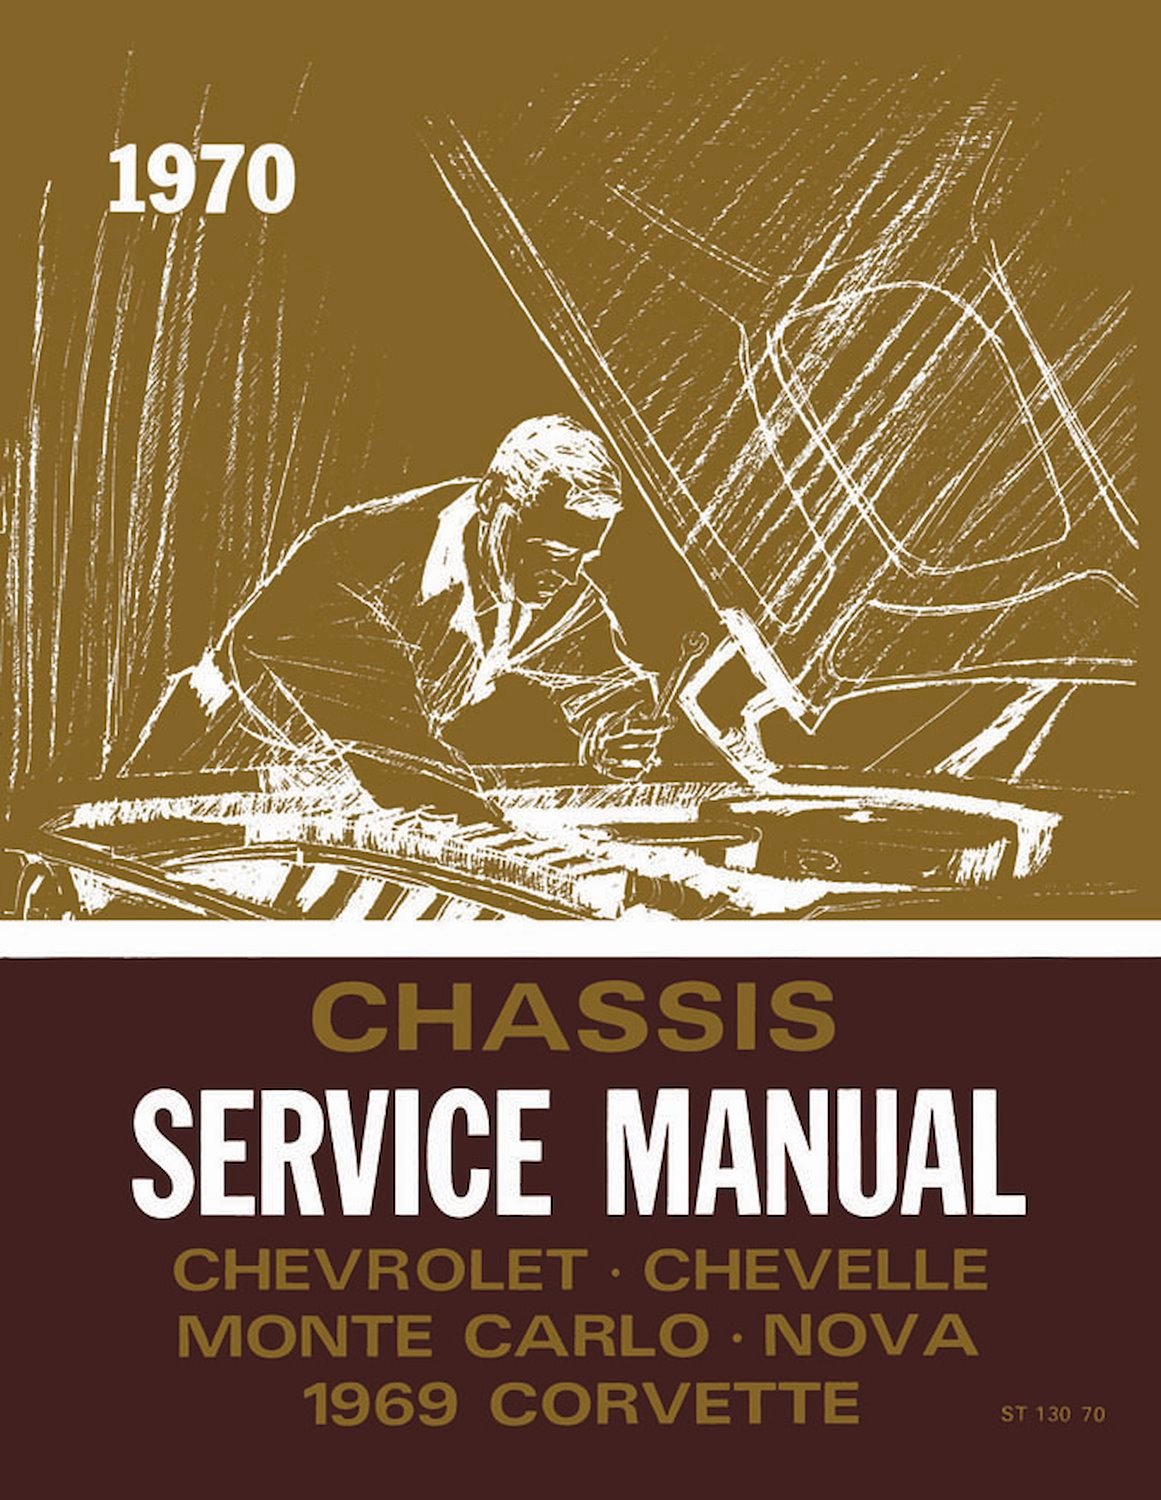 Chassis Service Manual for 1969 Chevrolet Corvette, 1970